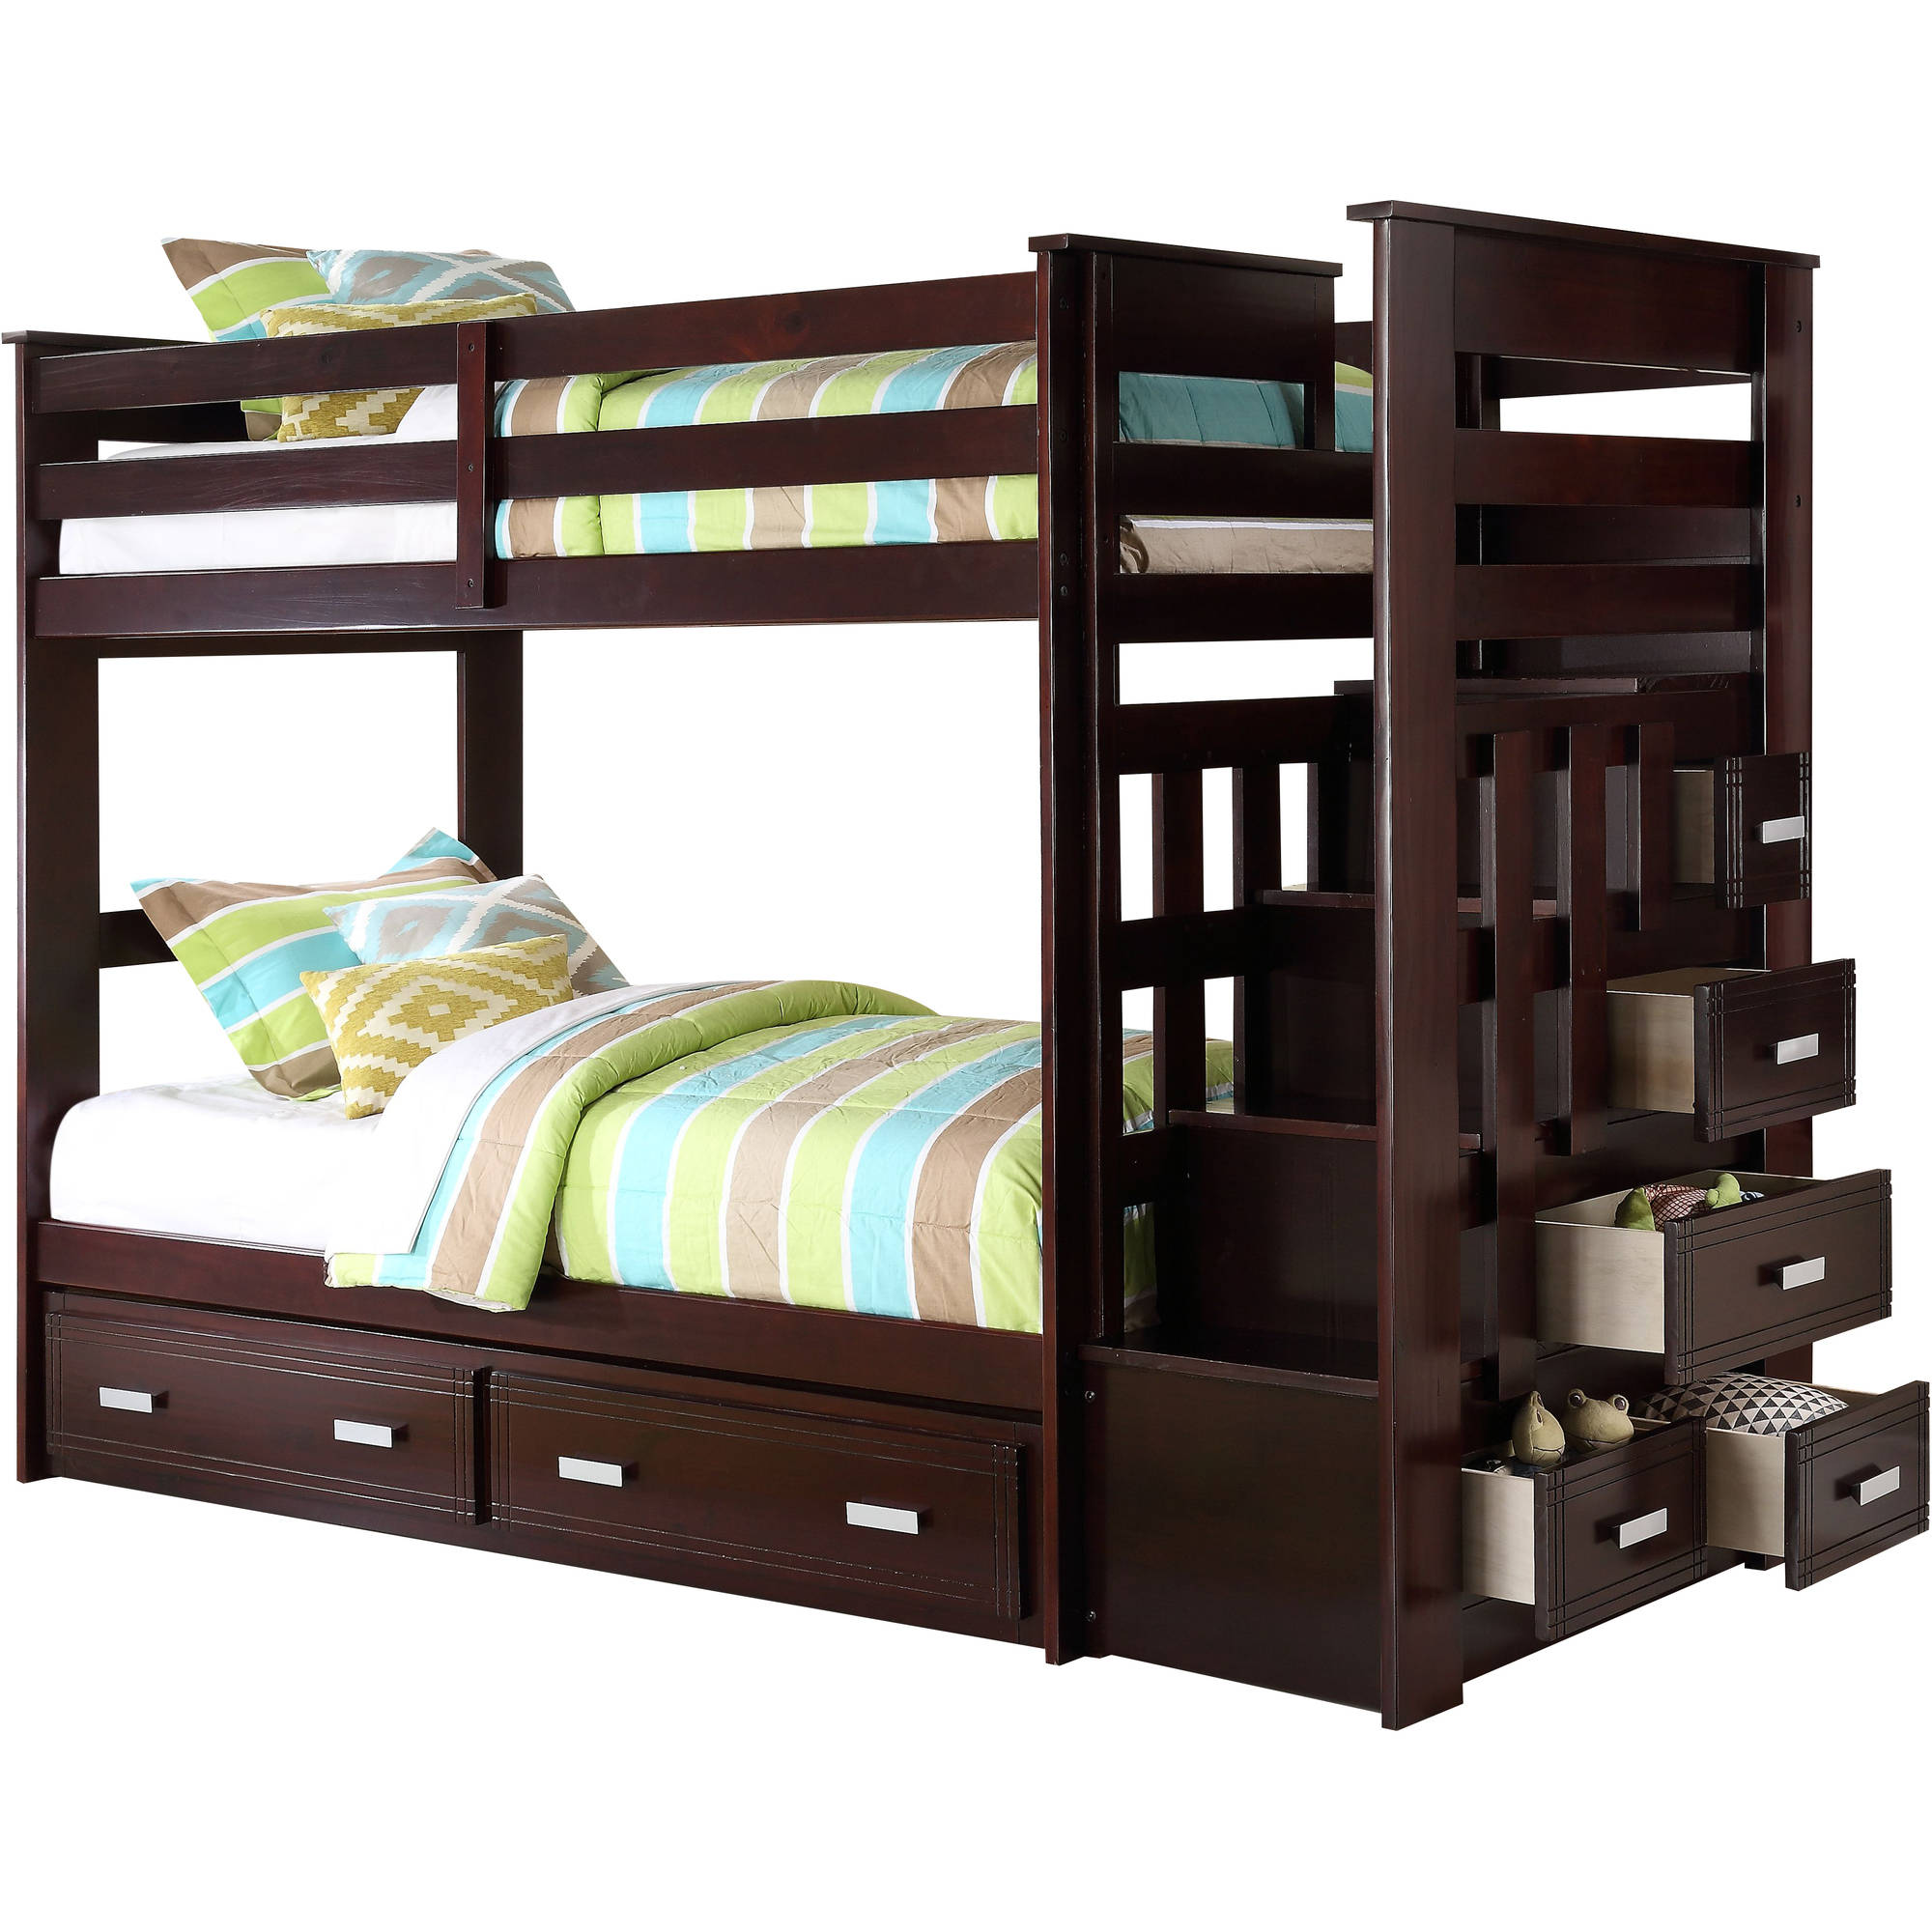 Acme Furniture Allentown Twin Over Twin Wood Bunk Bed with Storage, Espresso - image 2 of 7